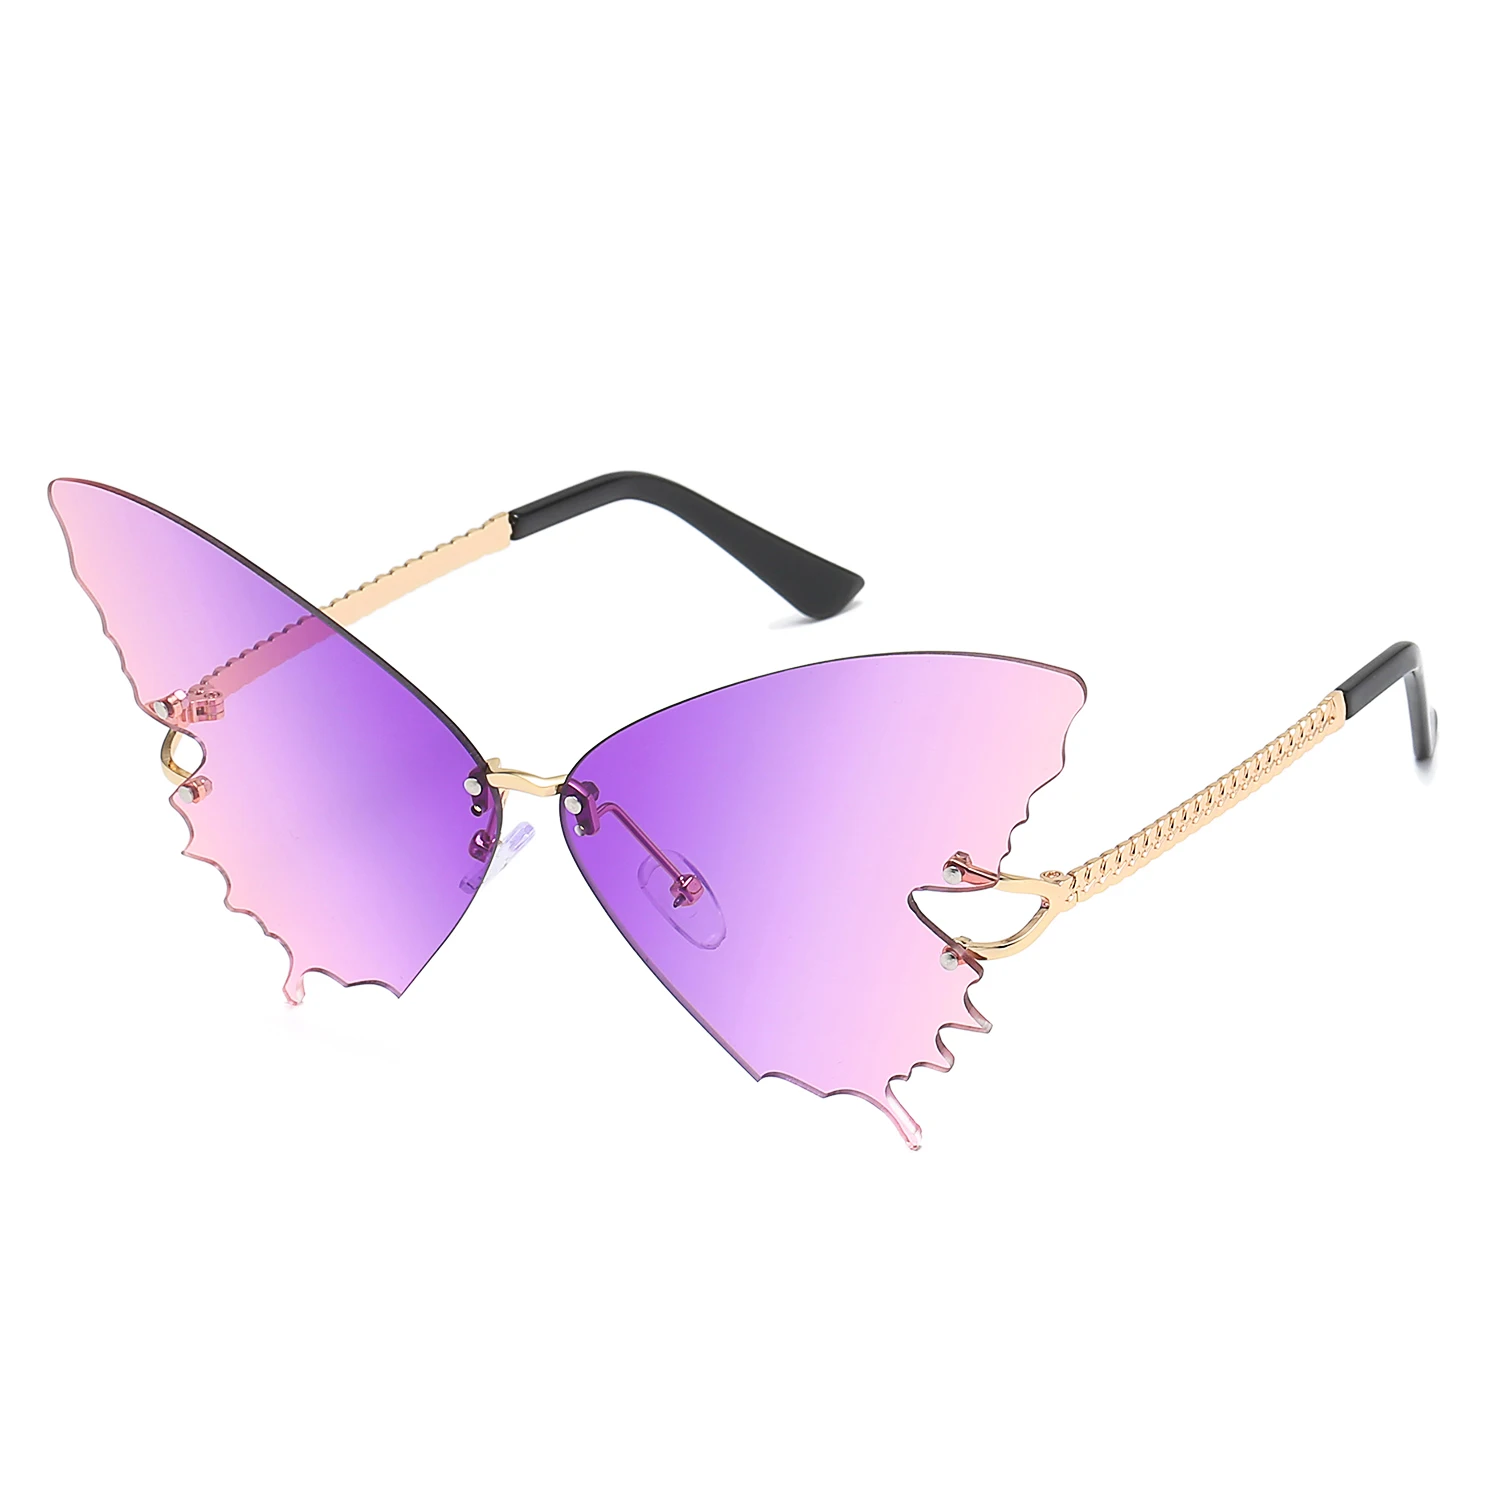 Fashion Rimless Dragonfly Wing Sunglasses Women Vintage Clear Ocean Lens EyY HL 